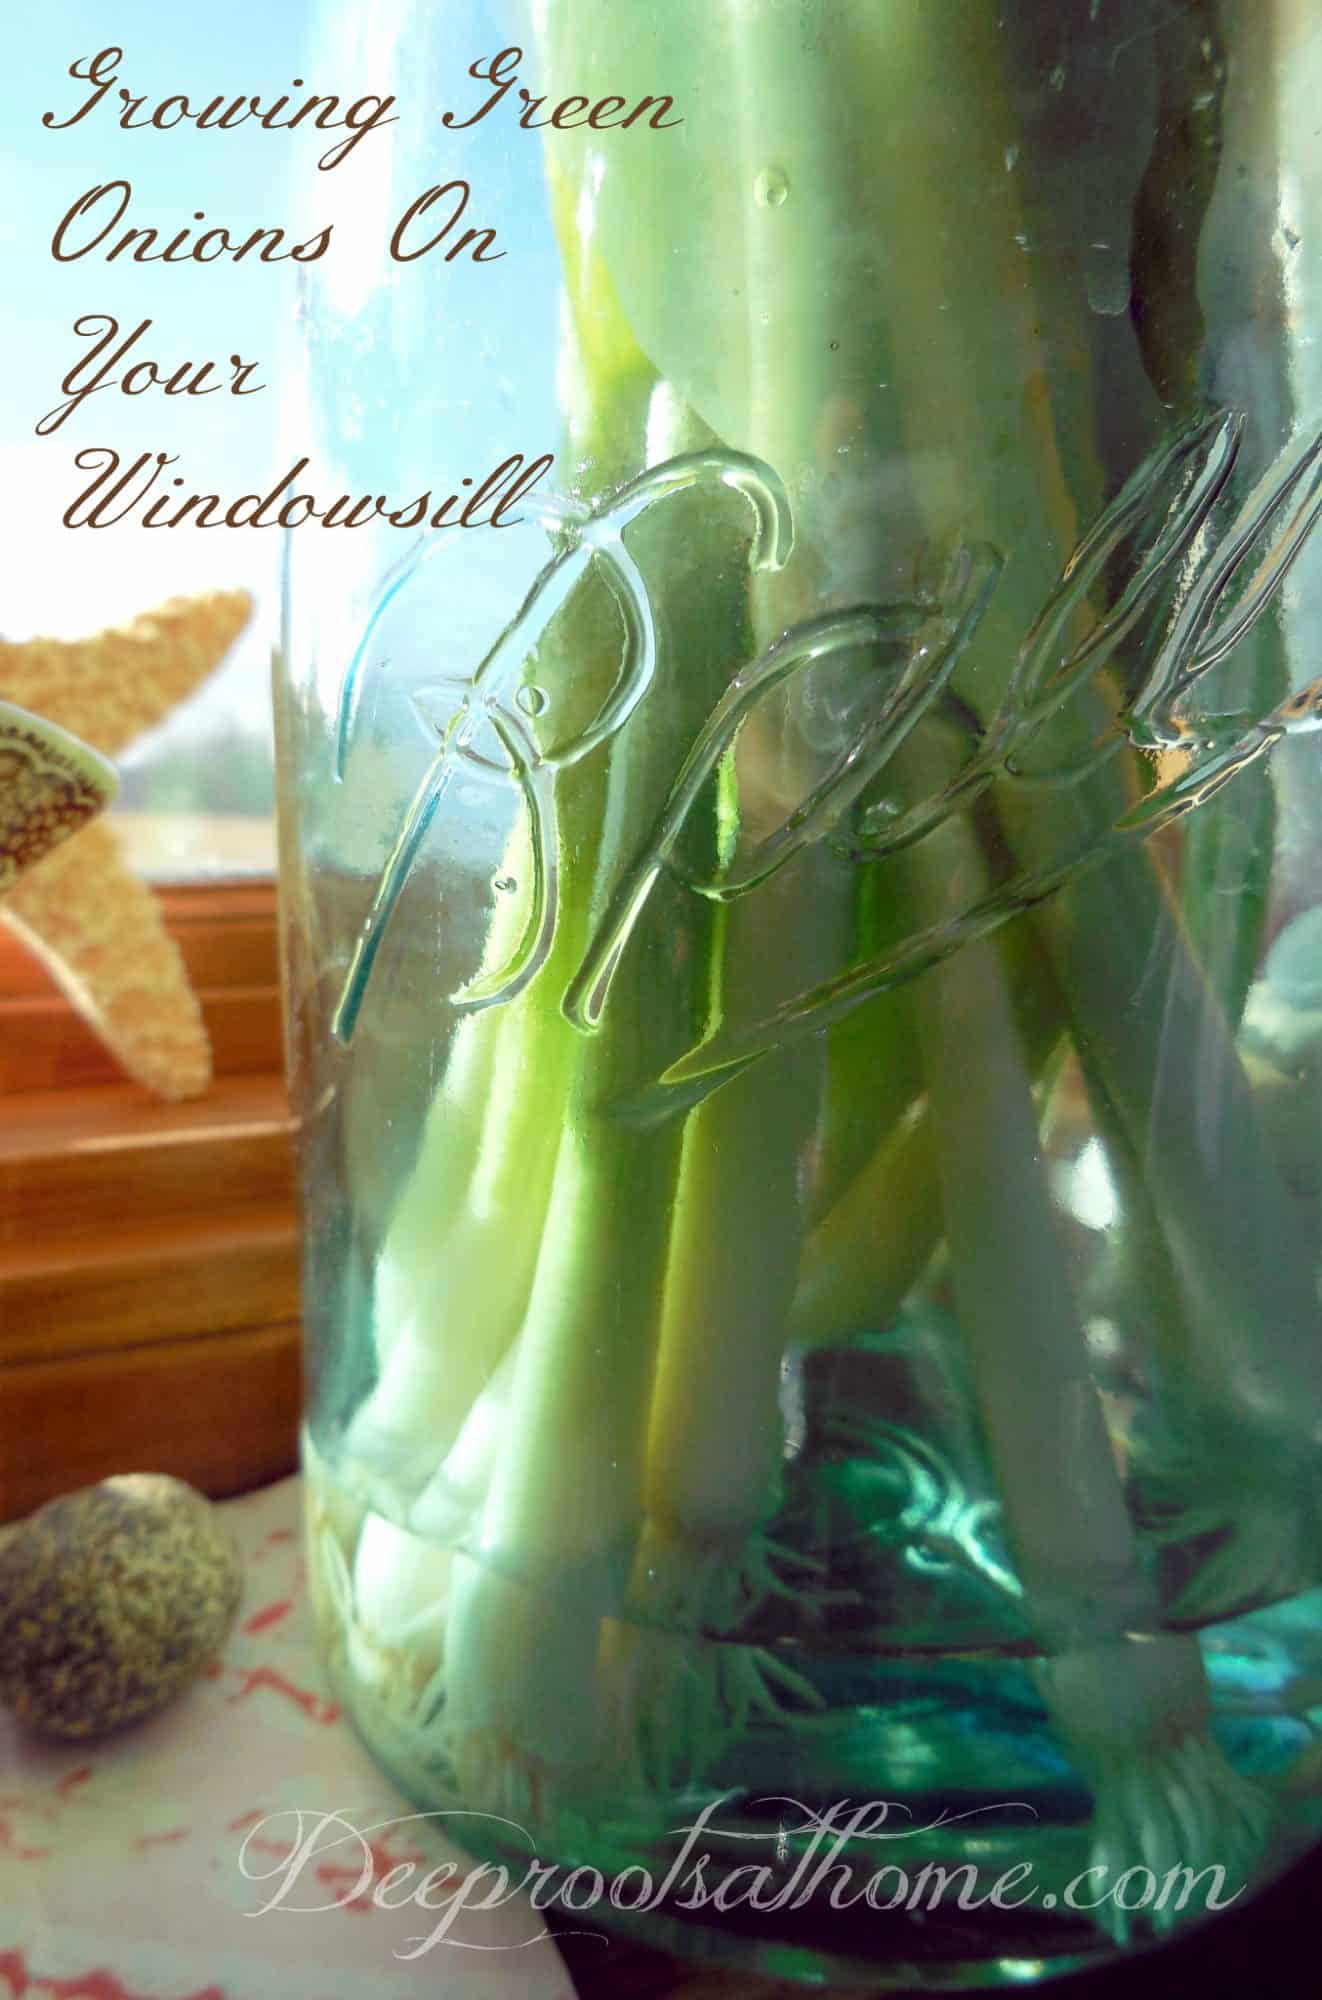 Growing Green Onions On Your Windowsill Couldn't Be Easier. Roots in water in Ball canning jar.